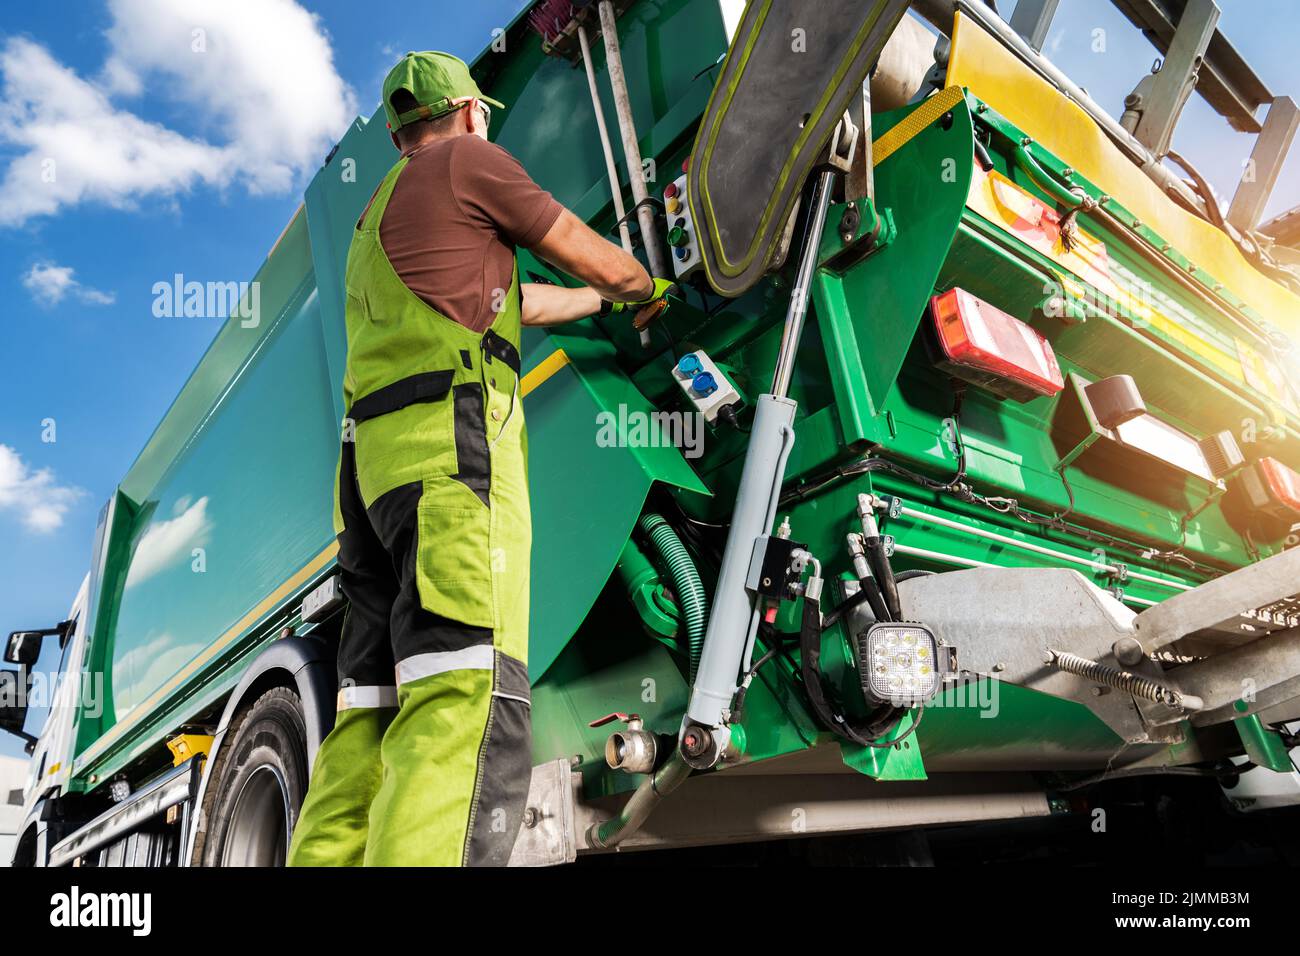 Modern Garbage Truck and Caucasian Waste Collector Worker. Waste Sorting and Management Theme. Stock Photo